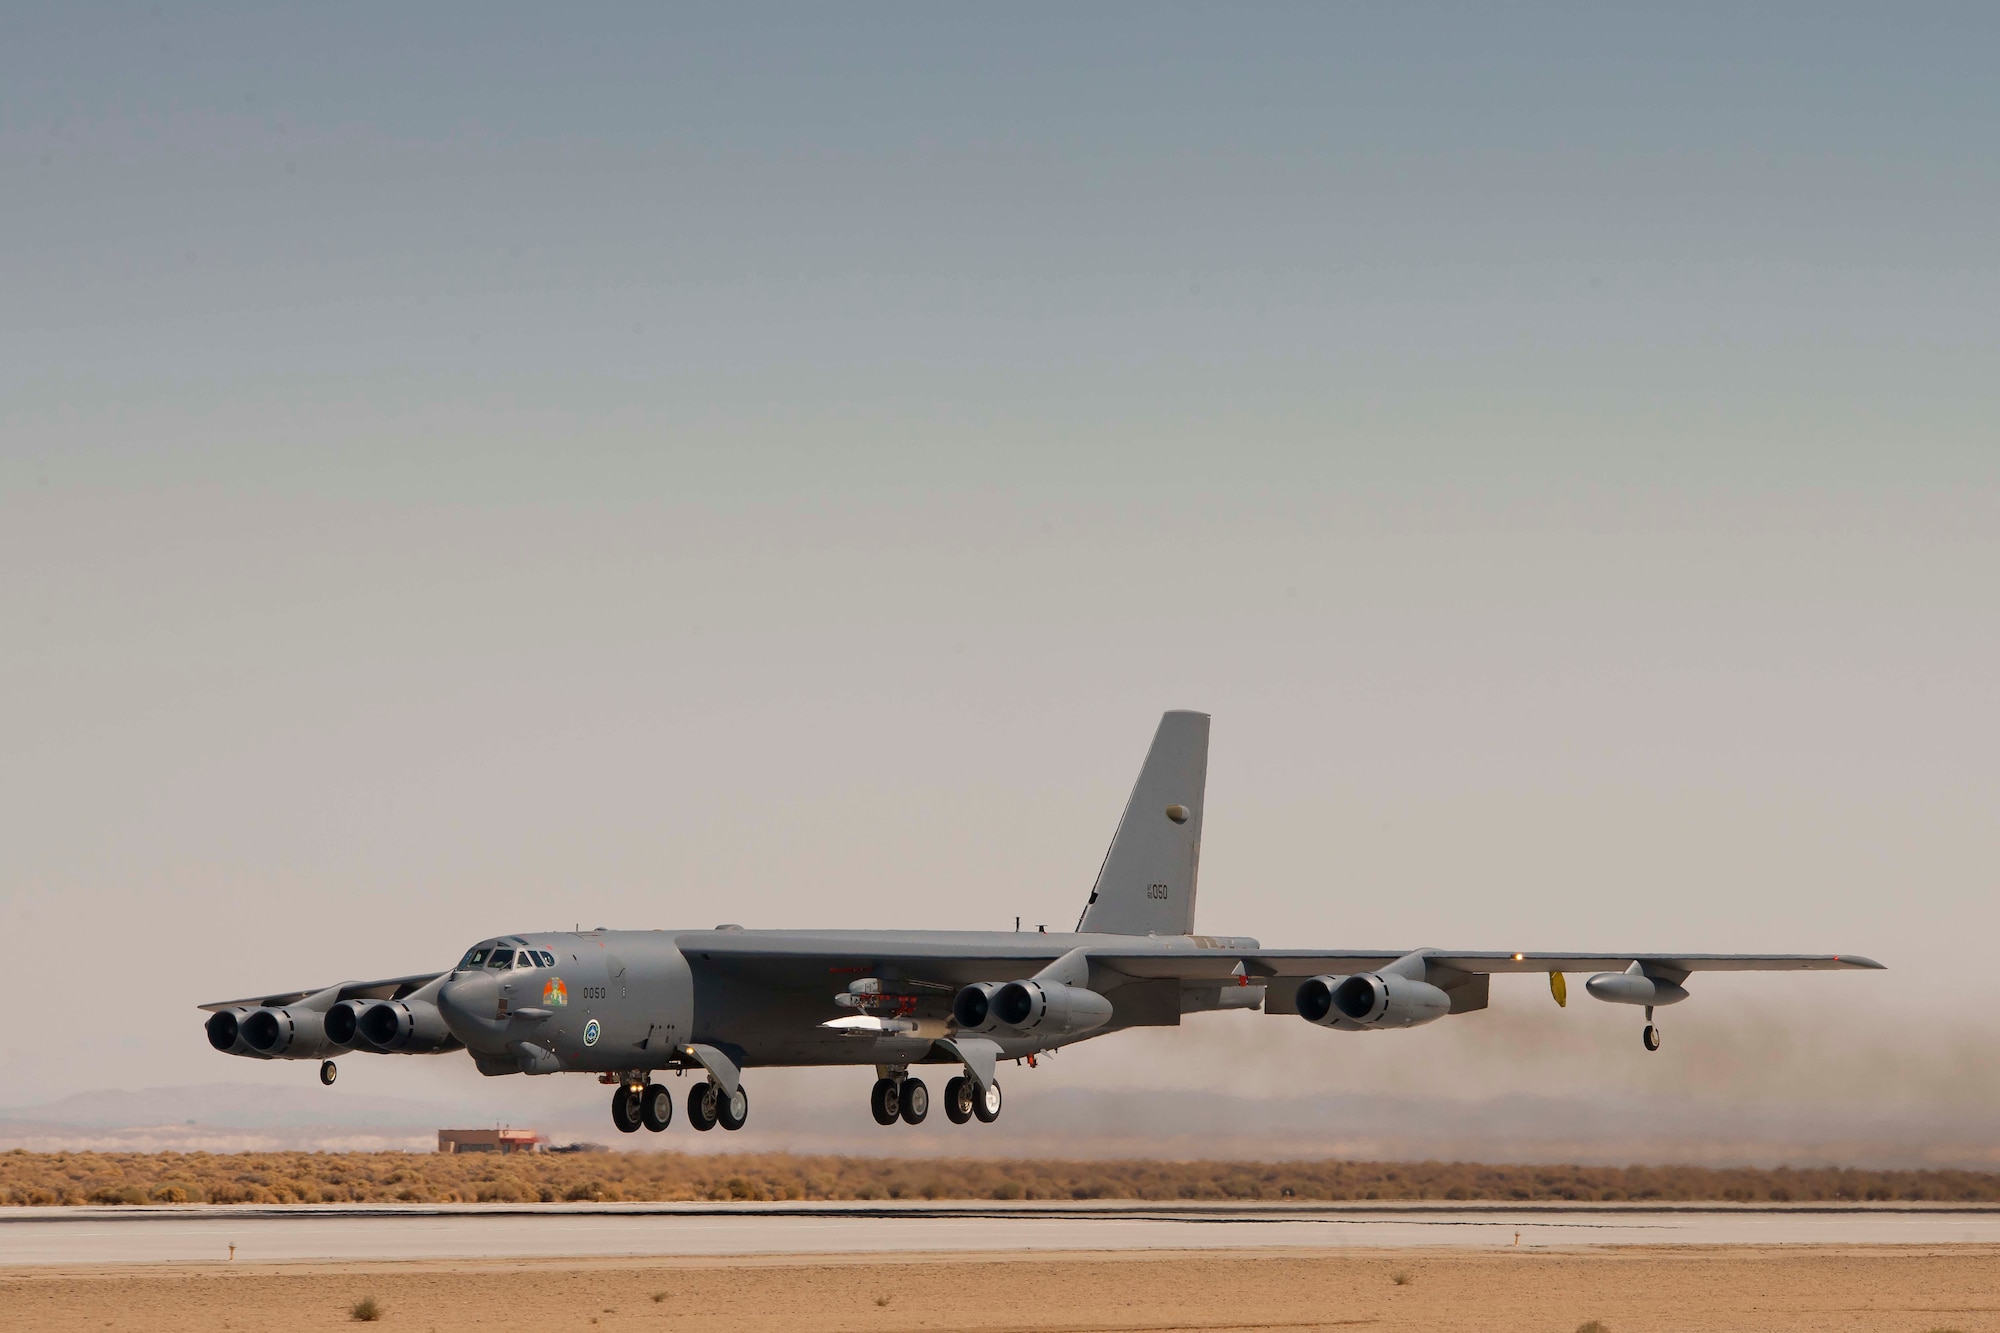 The B-52 Stratofortress carrying the X-51A Waverider takes off from Edwards Air Force Base, Calif., in preparation for the Aug. 14, 2012, test flight. The test ended prematurely when a fault with a control fin caused the vehicle to lose control. (Courtesy photo)